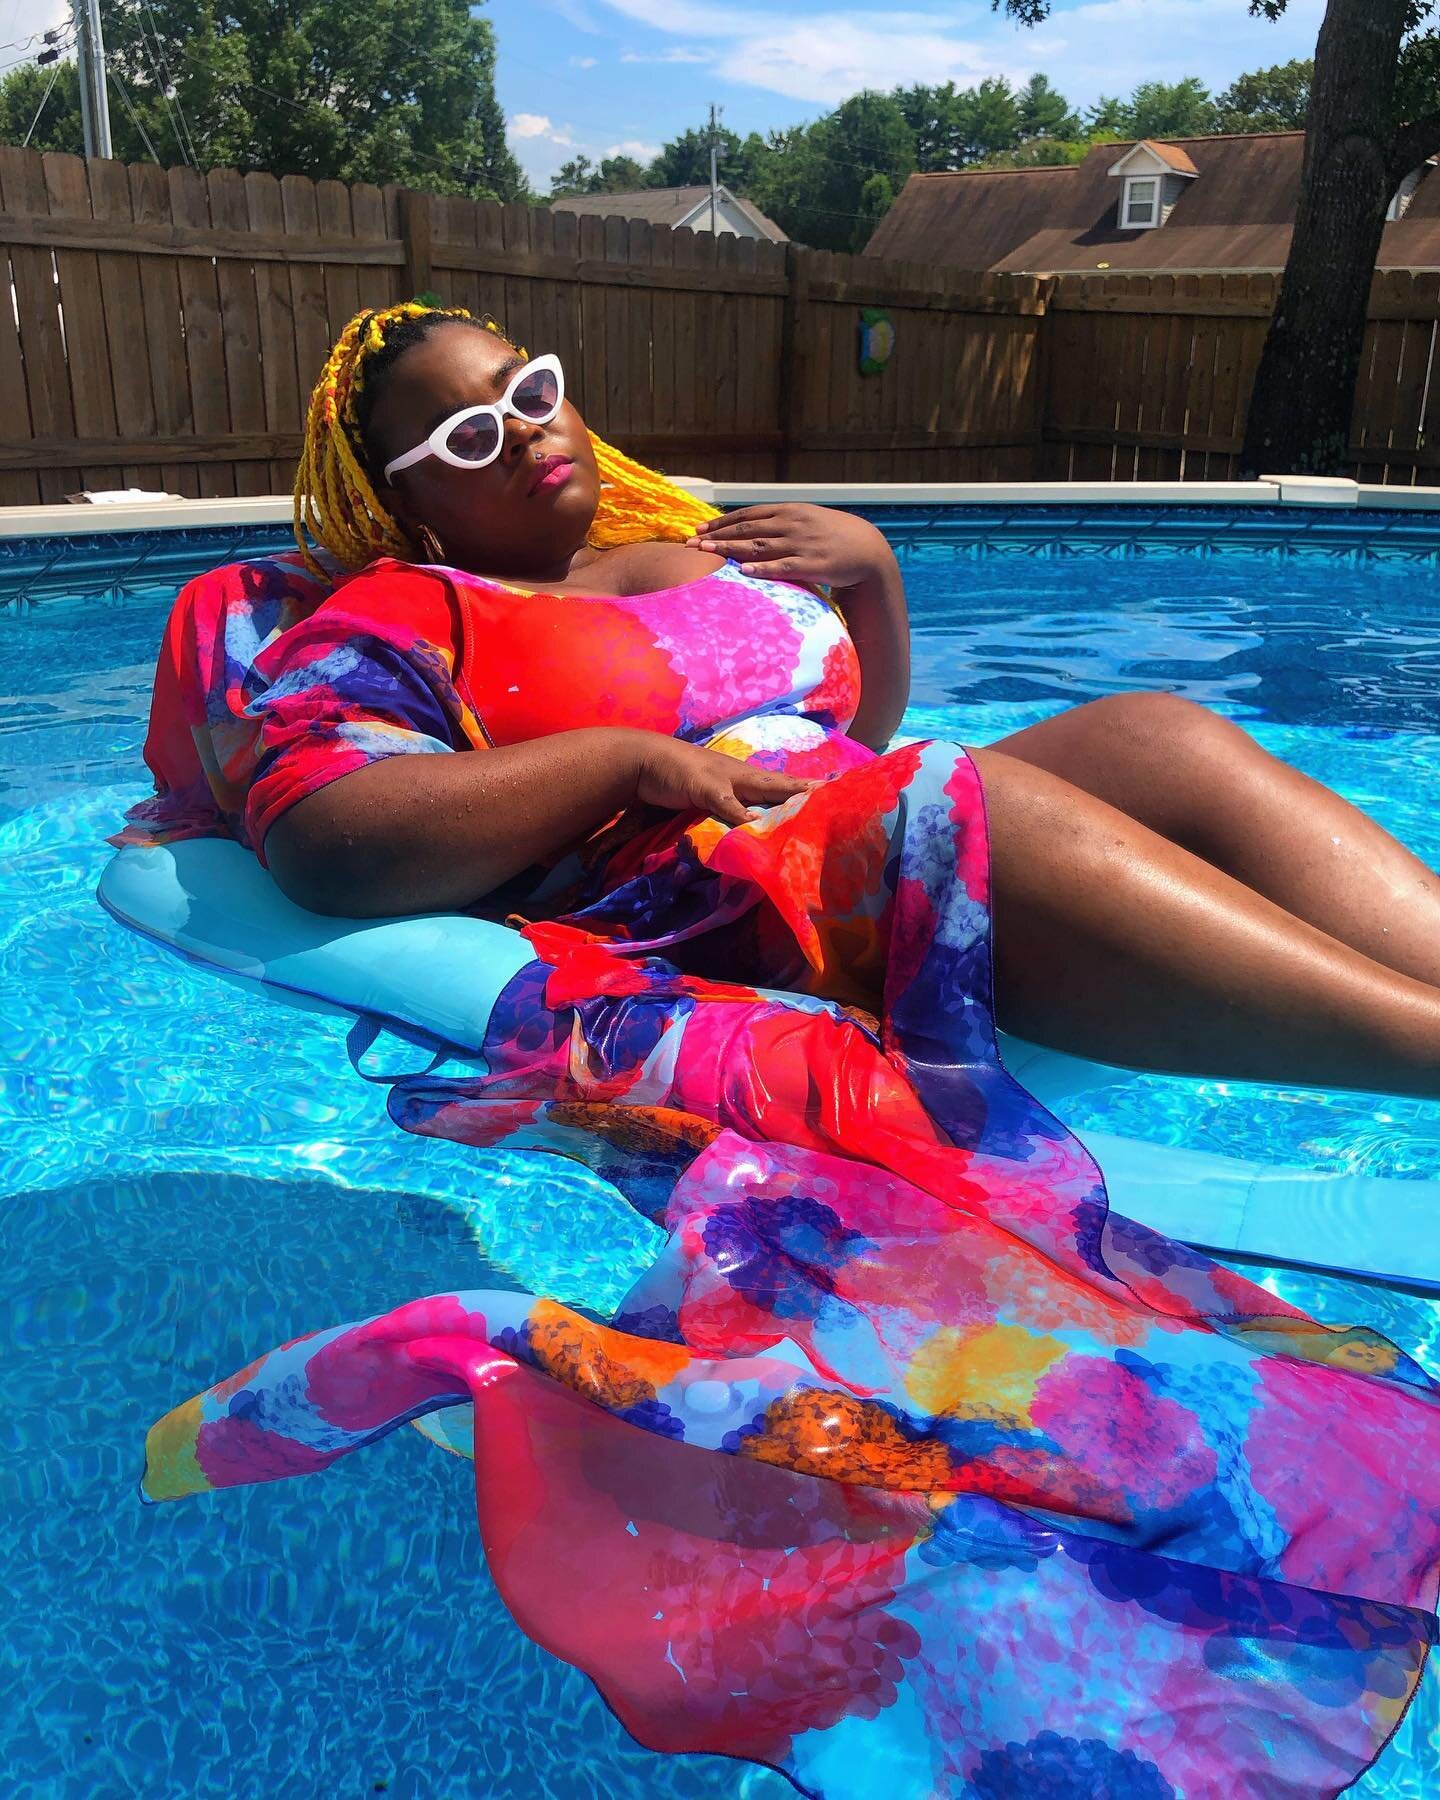 Pls @ someone who embodies this summer mood ✨

My girl @fatunicorn is wearing pieces from the upcoming @ken.drama Spring Summer 2021 collection! 💕

These pieces will be available for purchase in April BUT should I do a limited release/preorder soon?